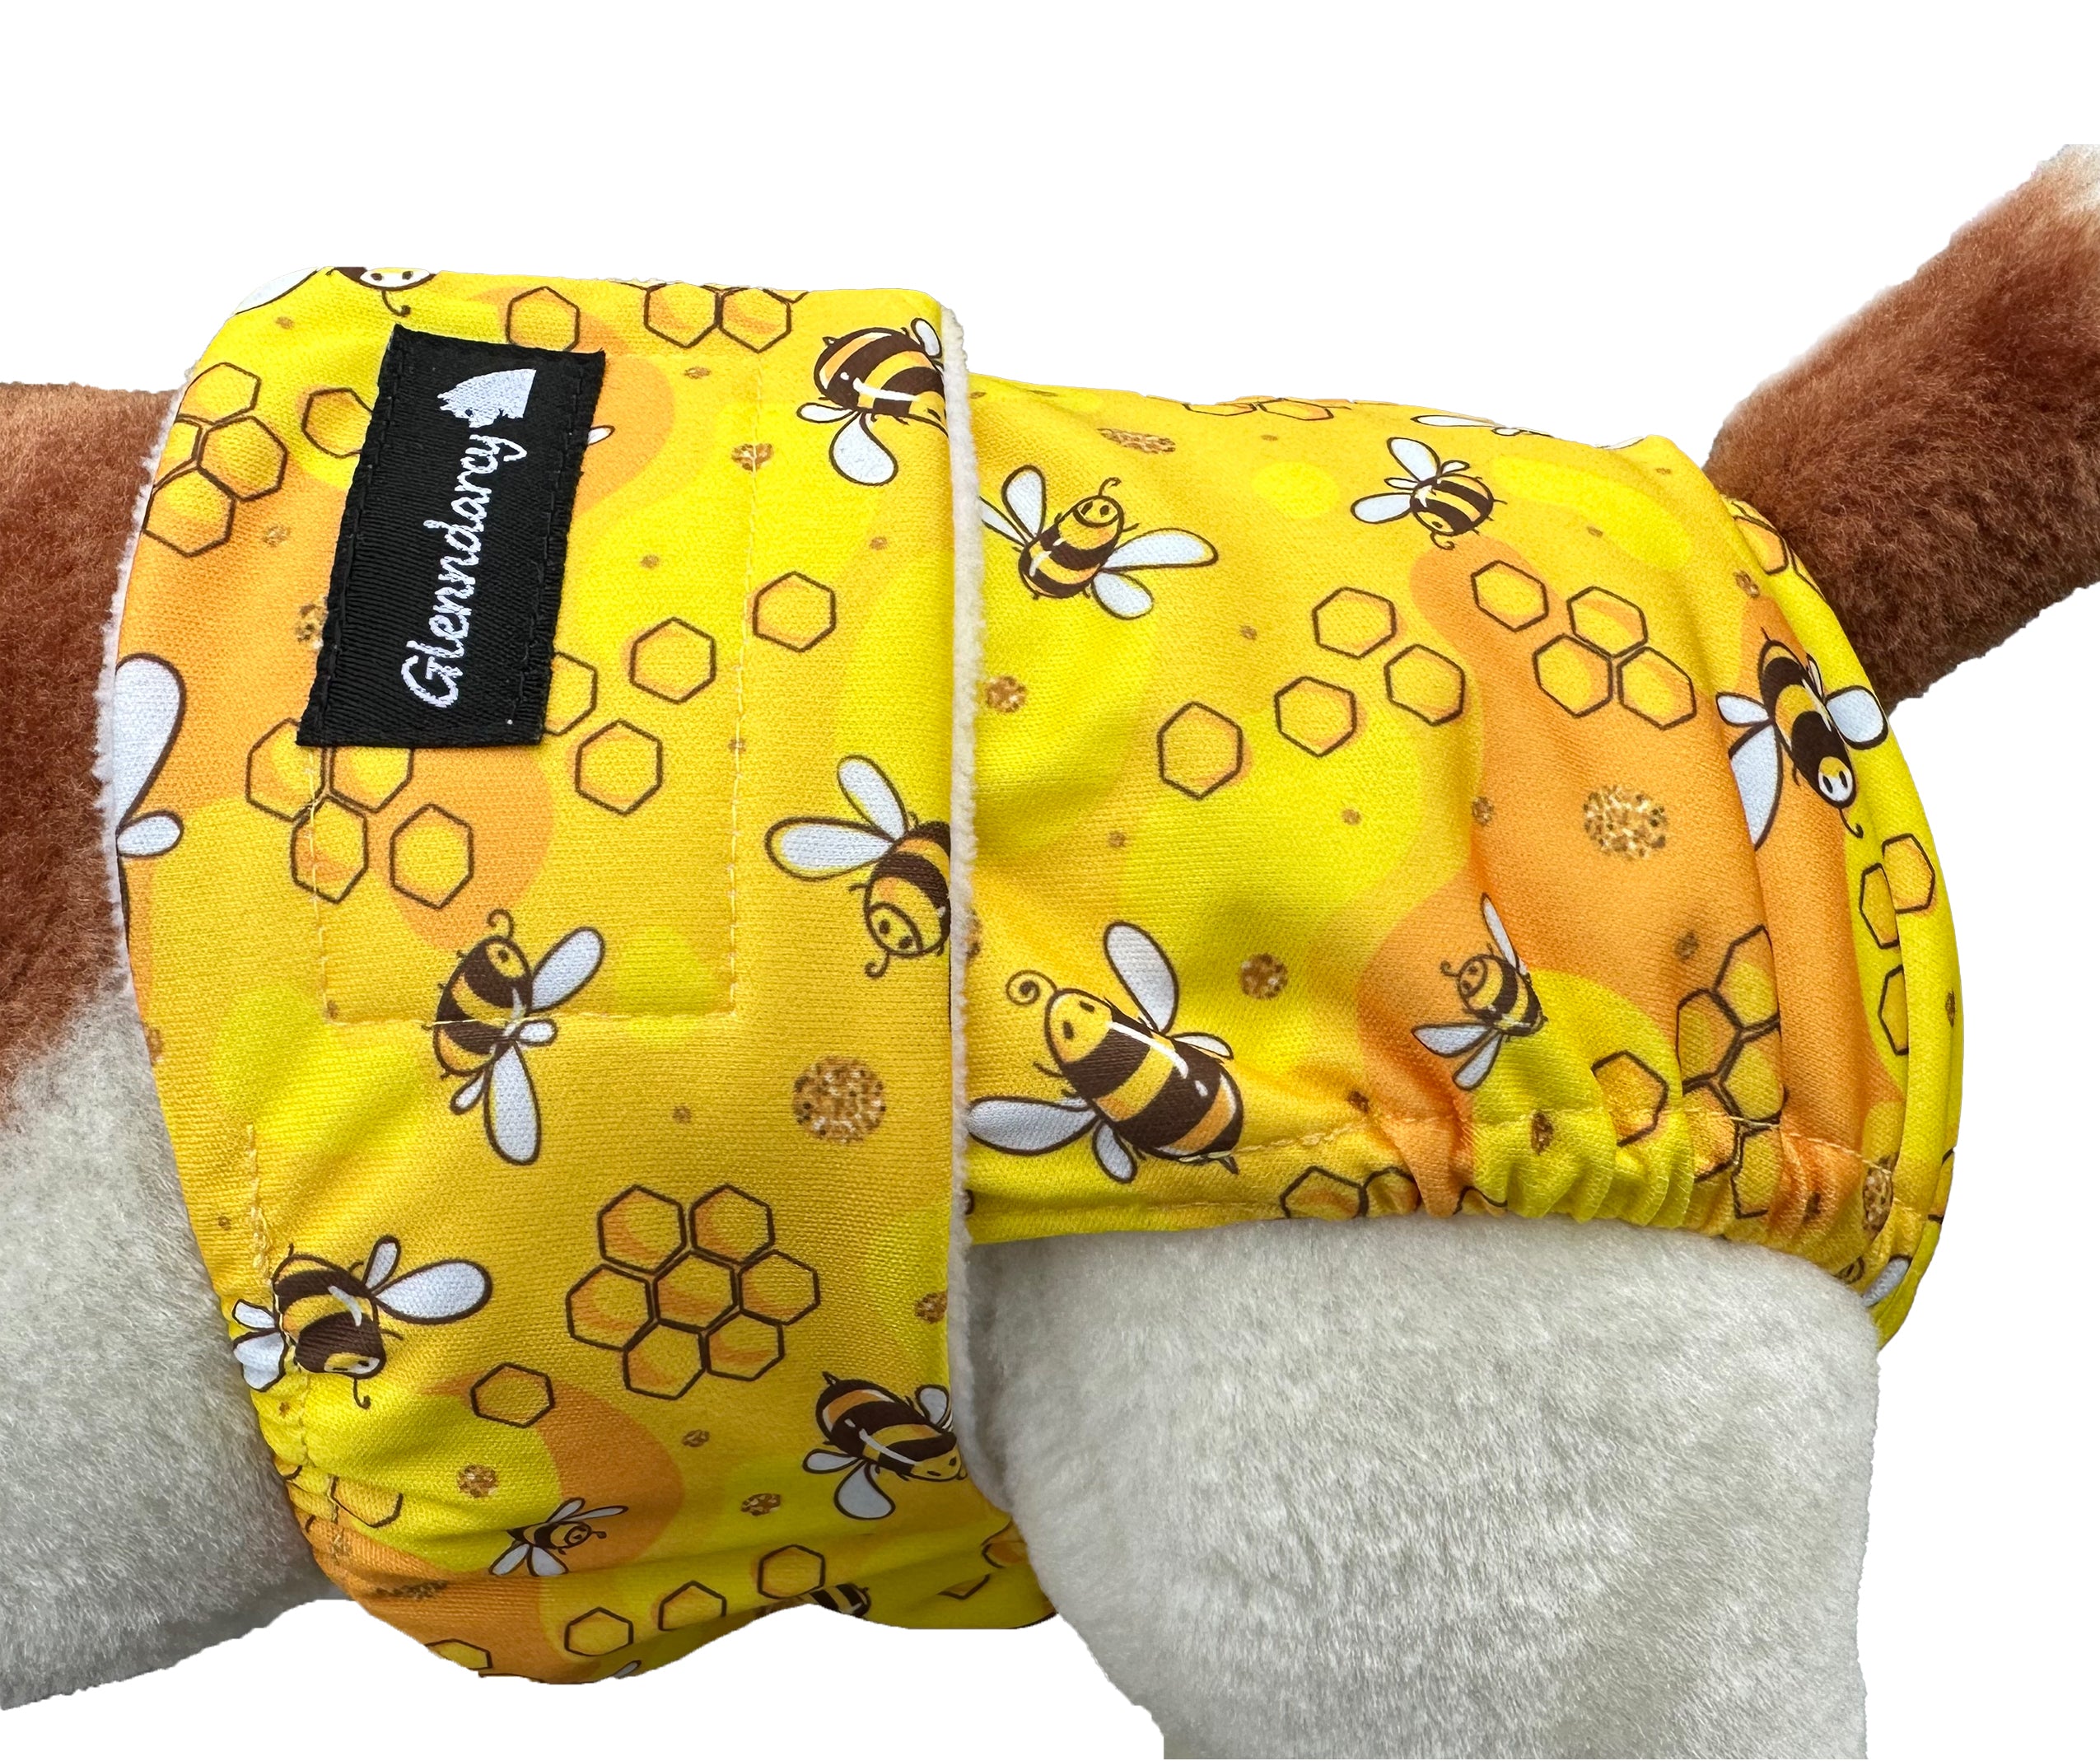 The Bee's Knees -  Female Dog Nappies